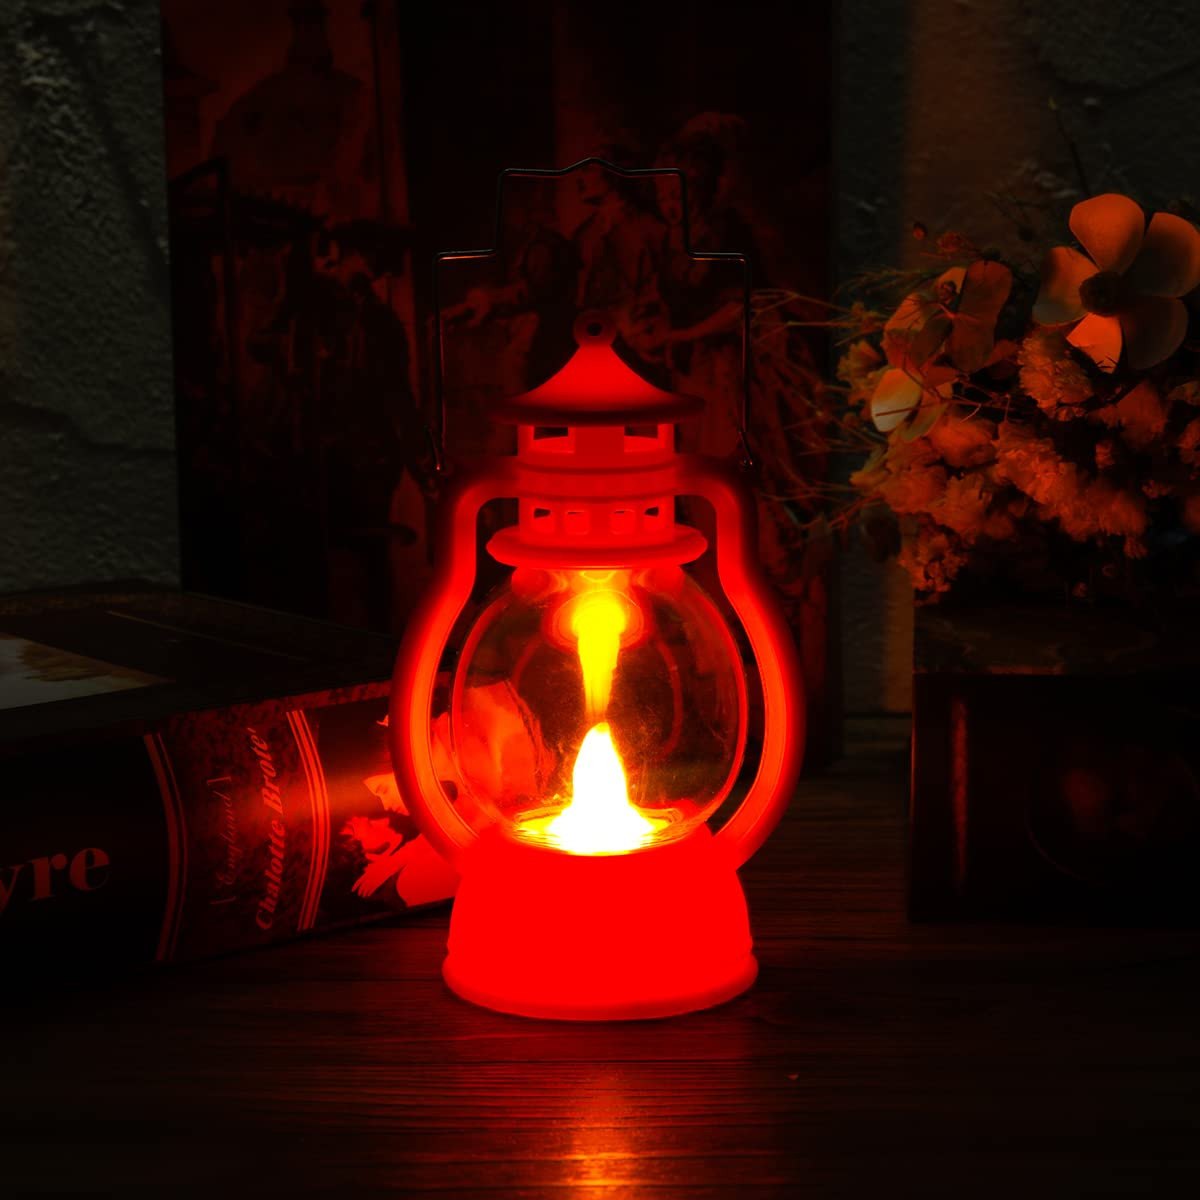 Kuber LED Lantern Lamp|Battey Operated|Flameless Yellow Light| Diwali Lights for Home Decoration,Along with Other Festivities & Parties|Black Hanging Lantern |Red